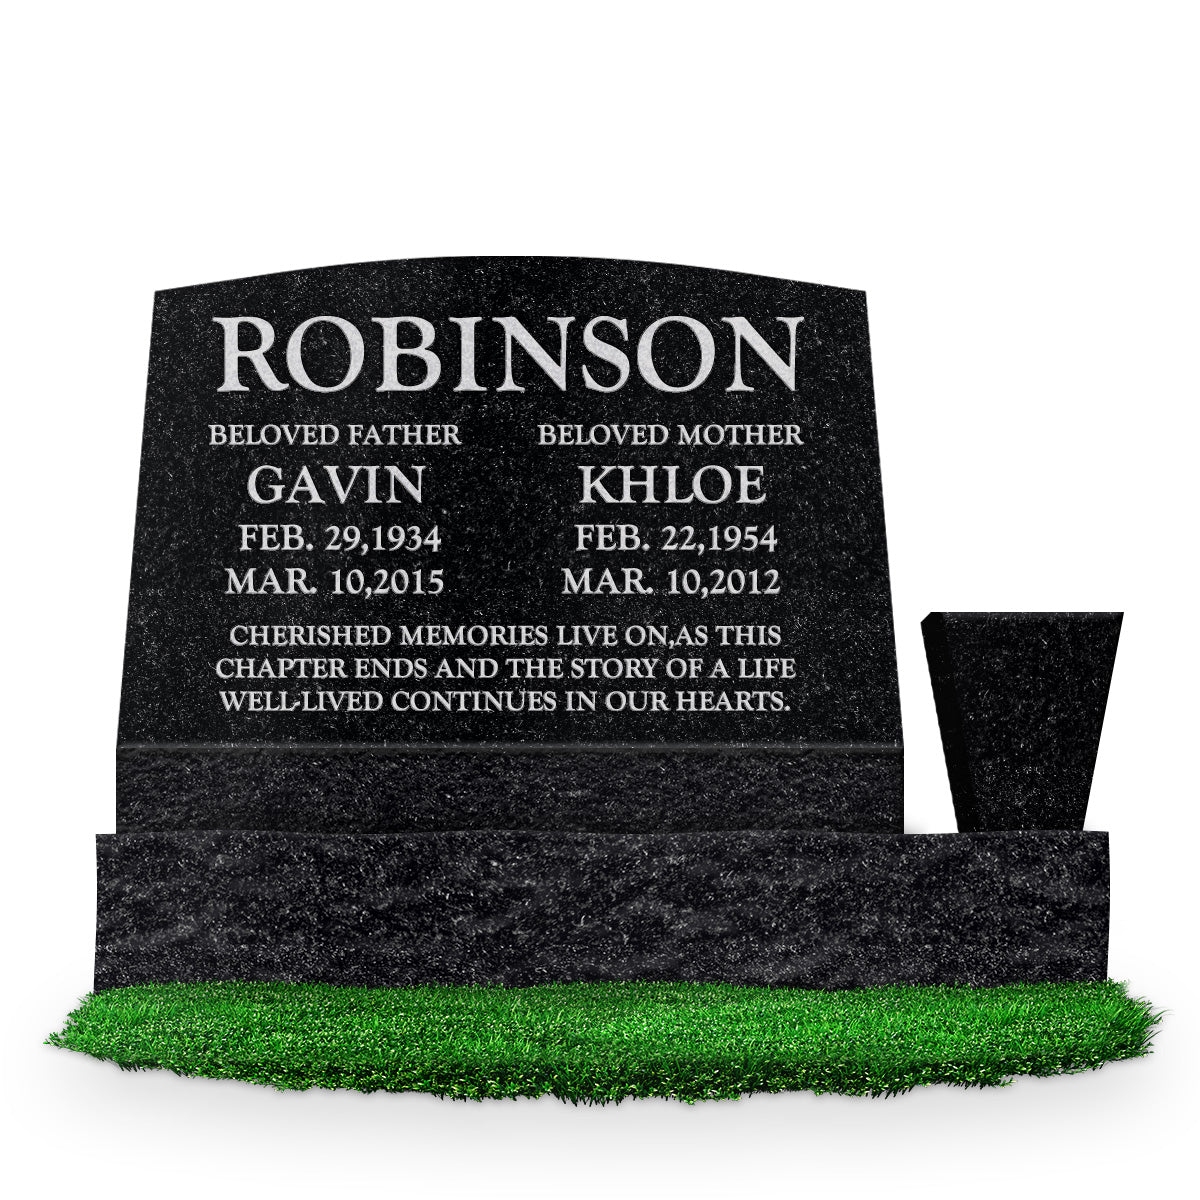 24″ x 10″ x 16″ Serp Top Slant Headstone: polished front and back; 34″ base; square tapered vase; Companion/Text